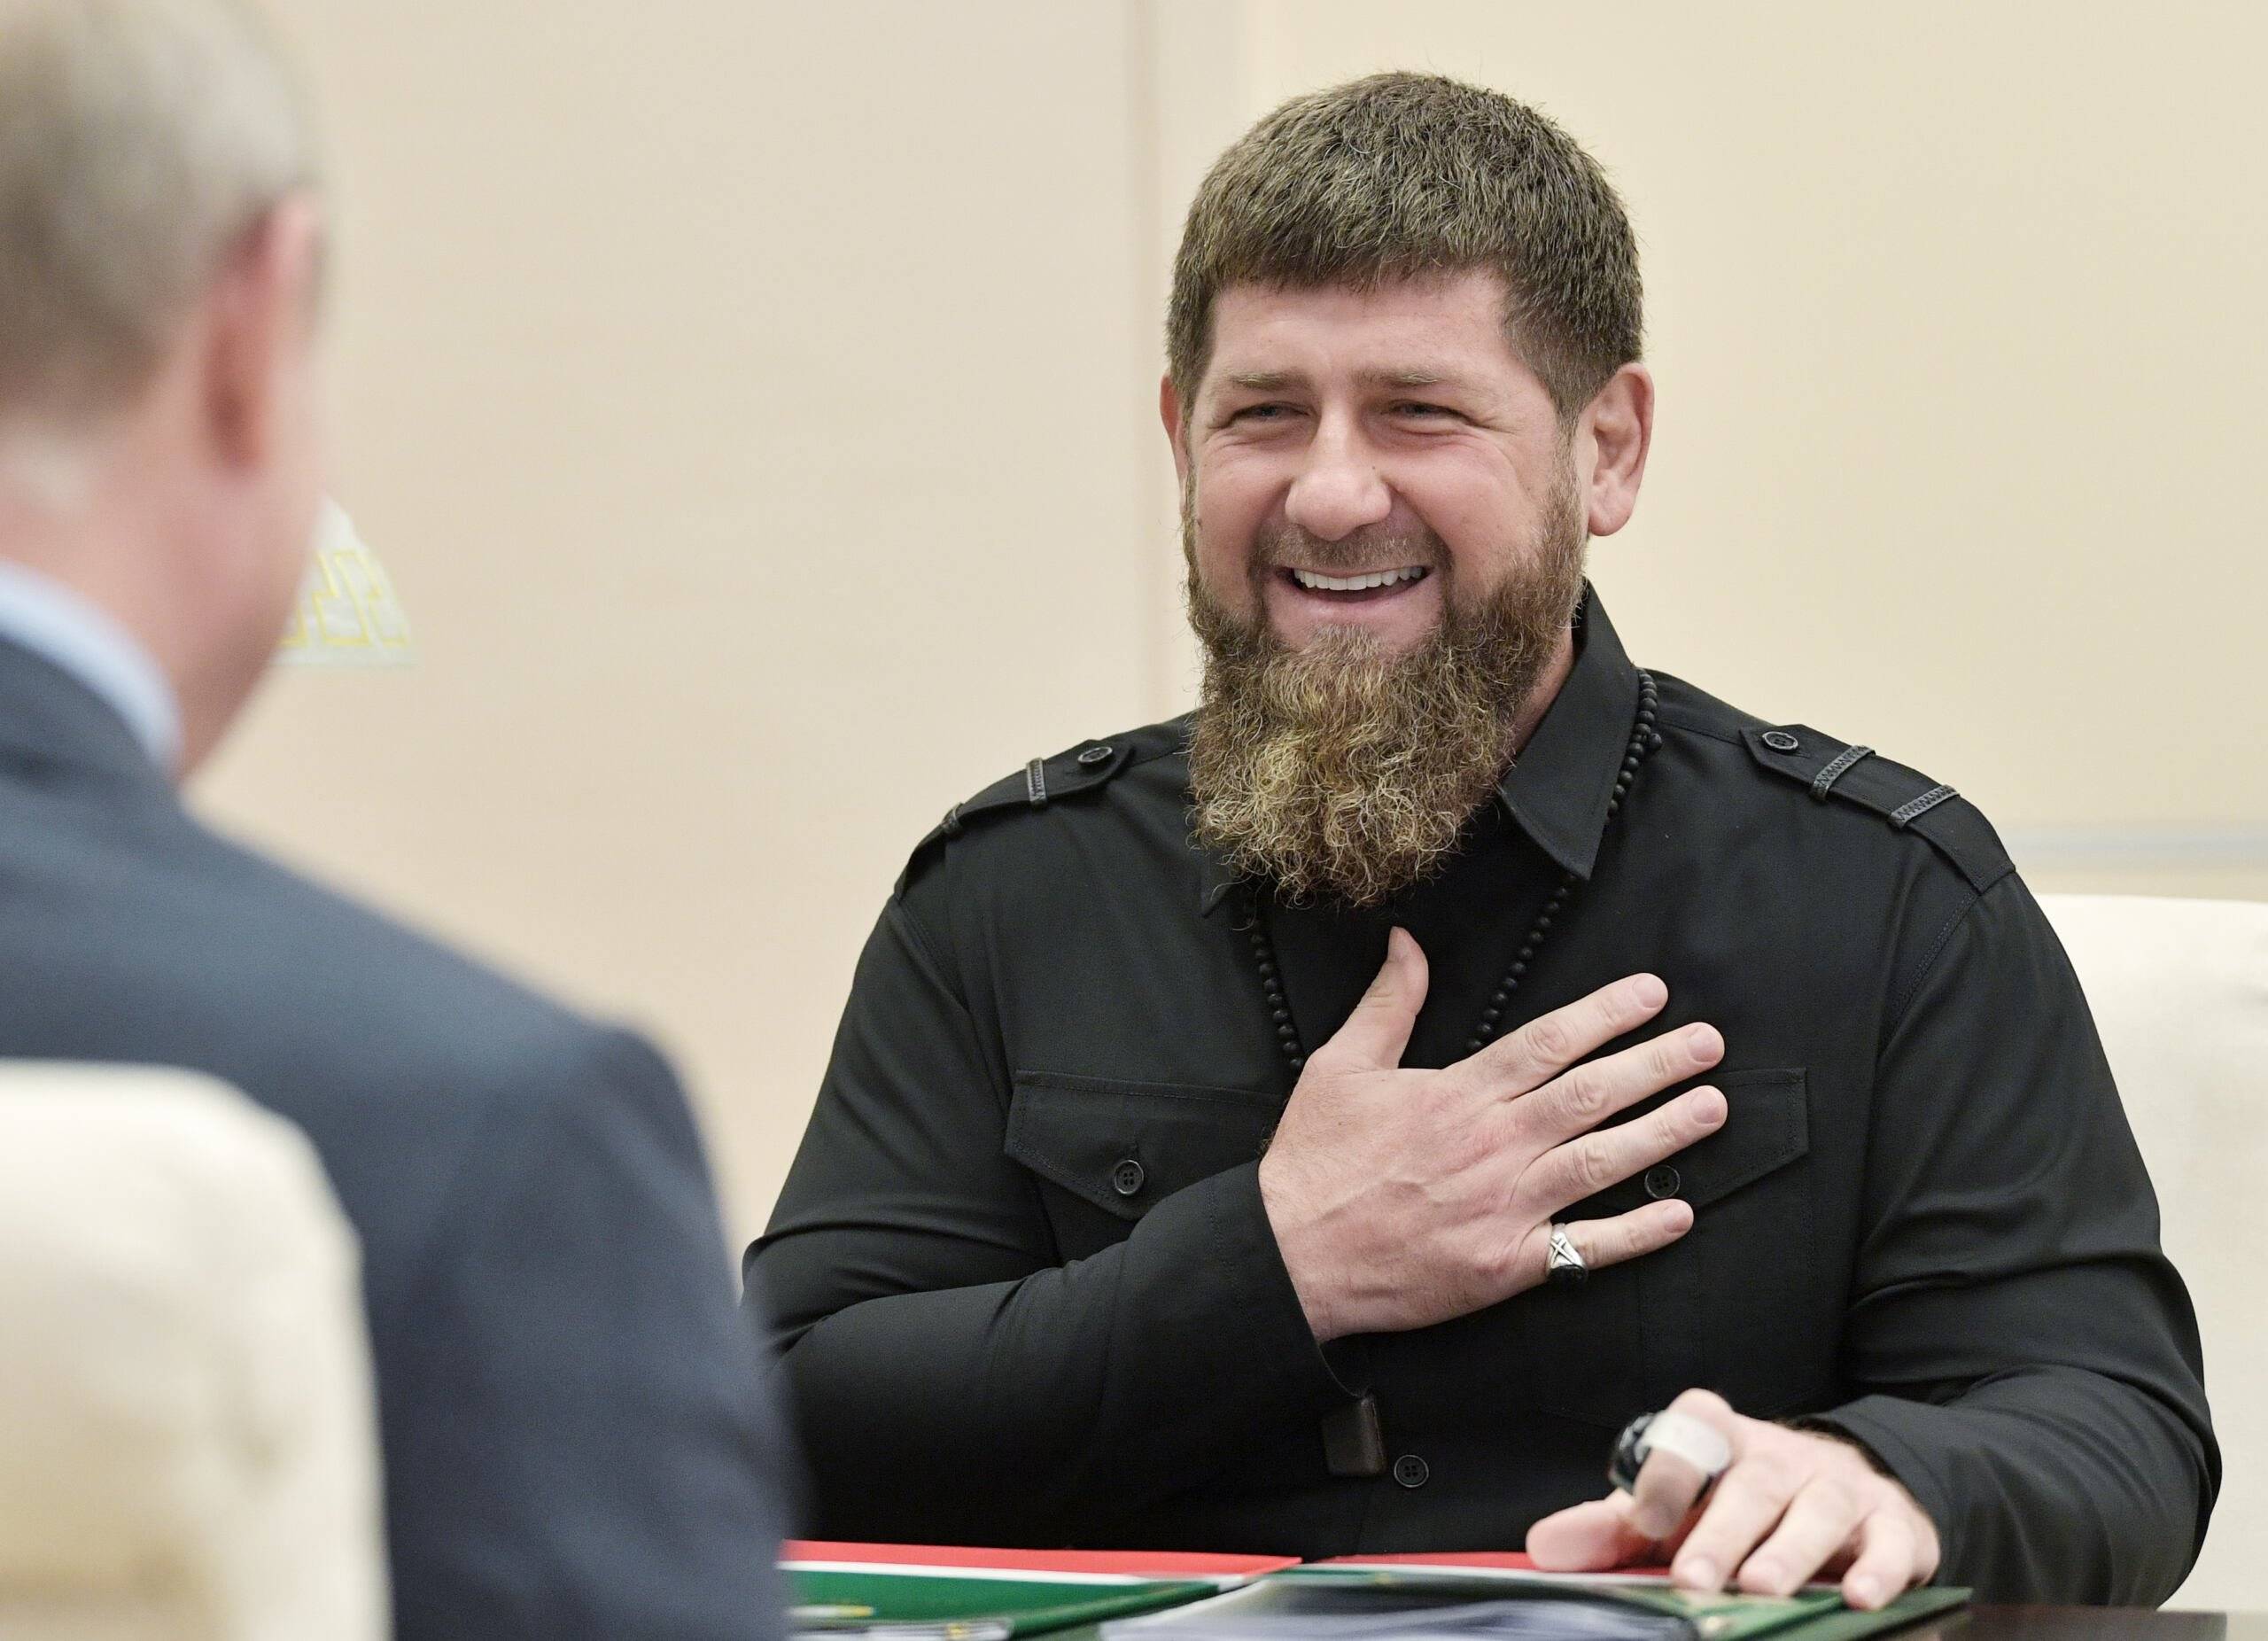 Head of the Chechen Republic Ramzan Kadyrov (R) speaks with Russian President Vladimir Putin at the Novo-Ogaryovo state residence outside Moscow, on August 31, 2019. (Photo by Alexey NIKOLSKY / Sputnik / AFP)